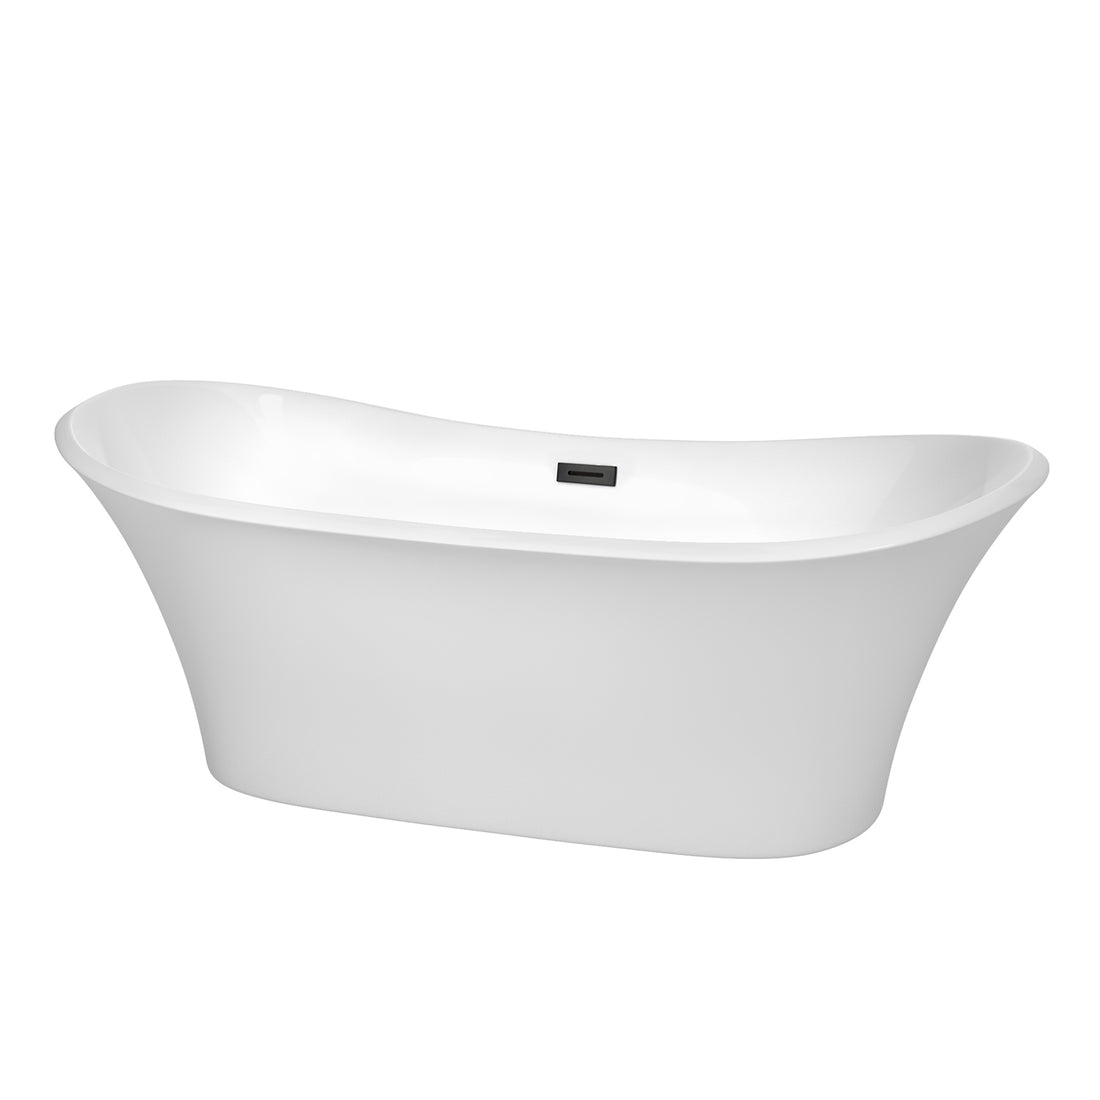 71&quot; Freestanding Bathtub in White with Matte Black Pop-up Drain and Overflow Trim Finish